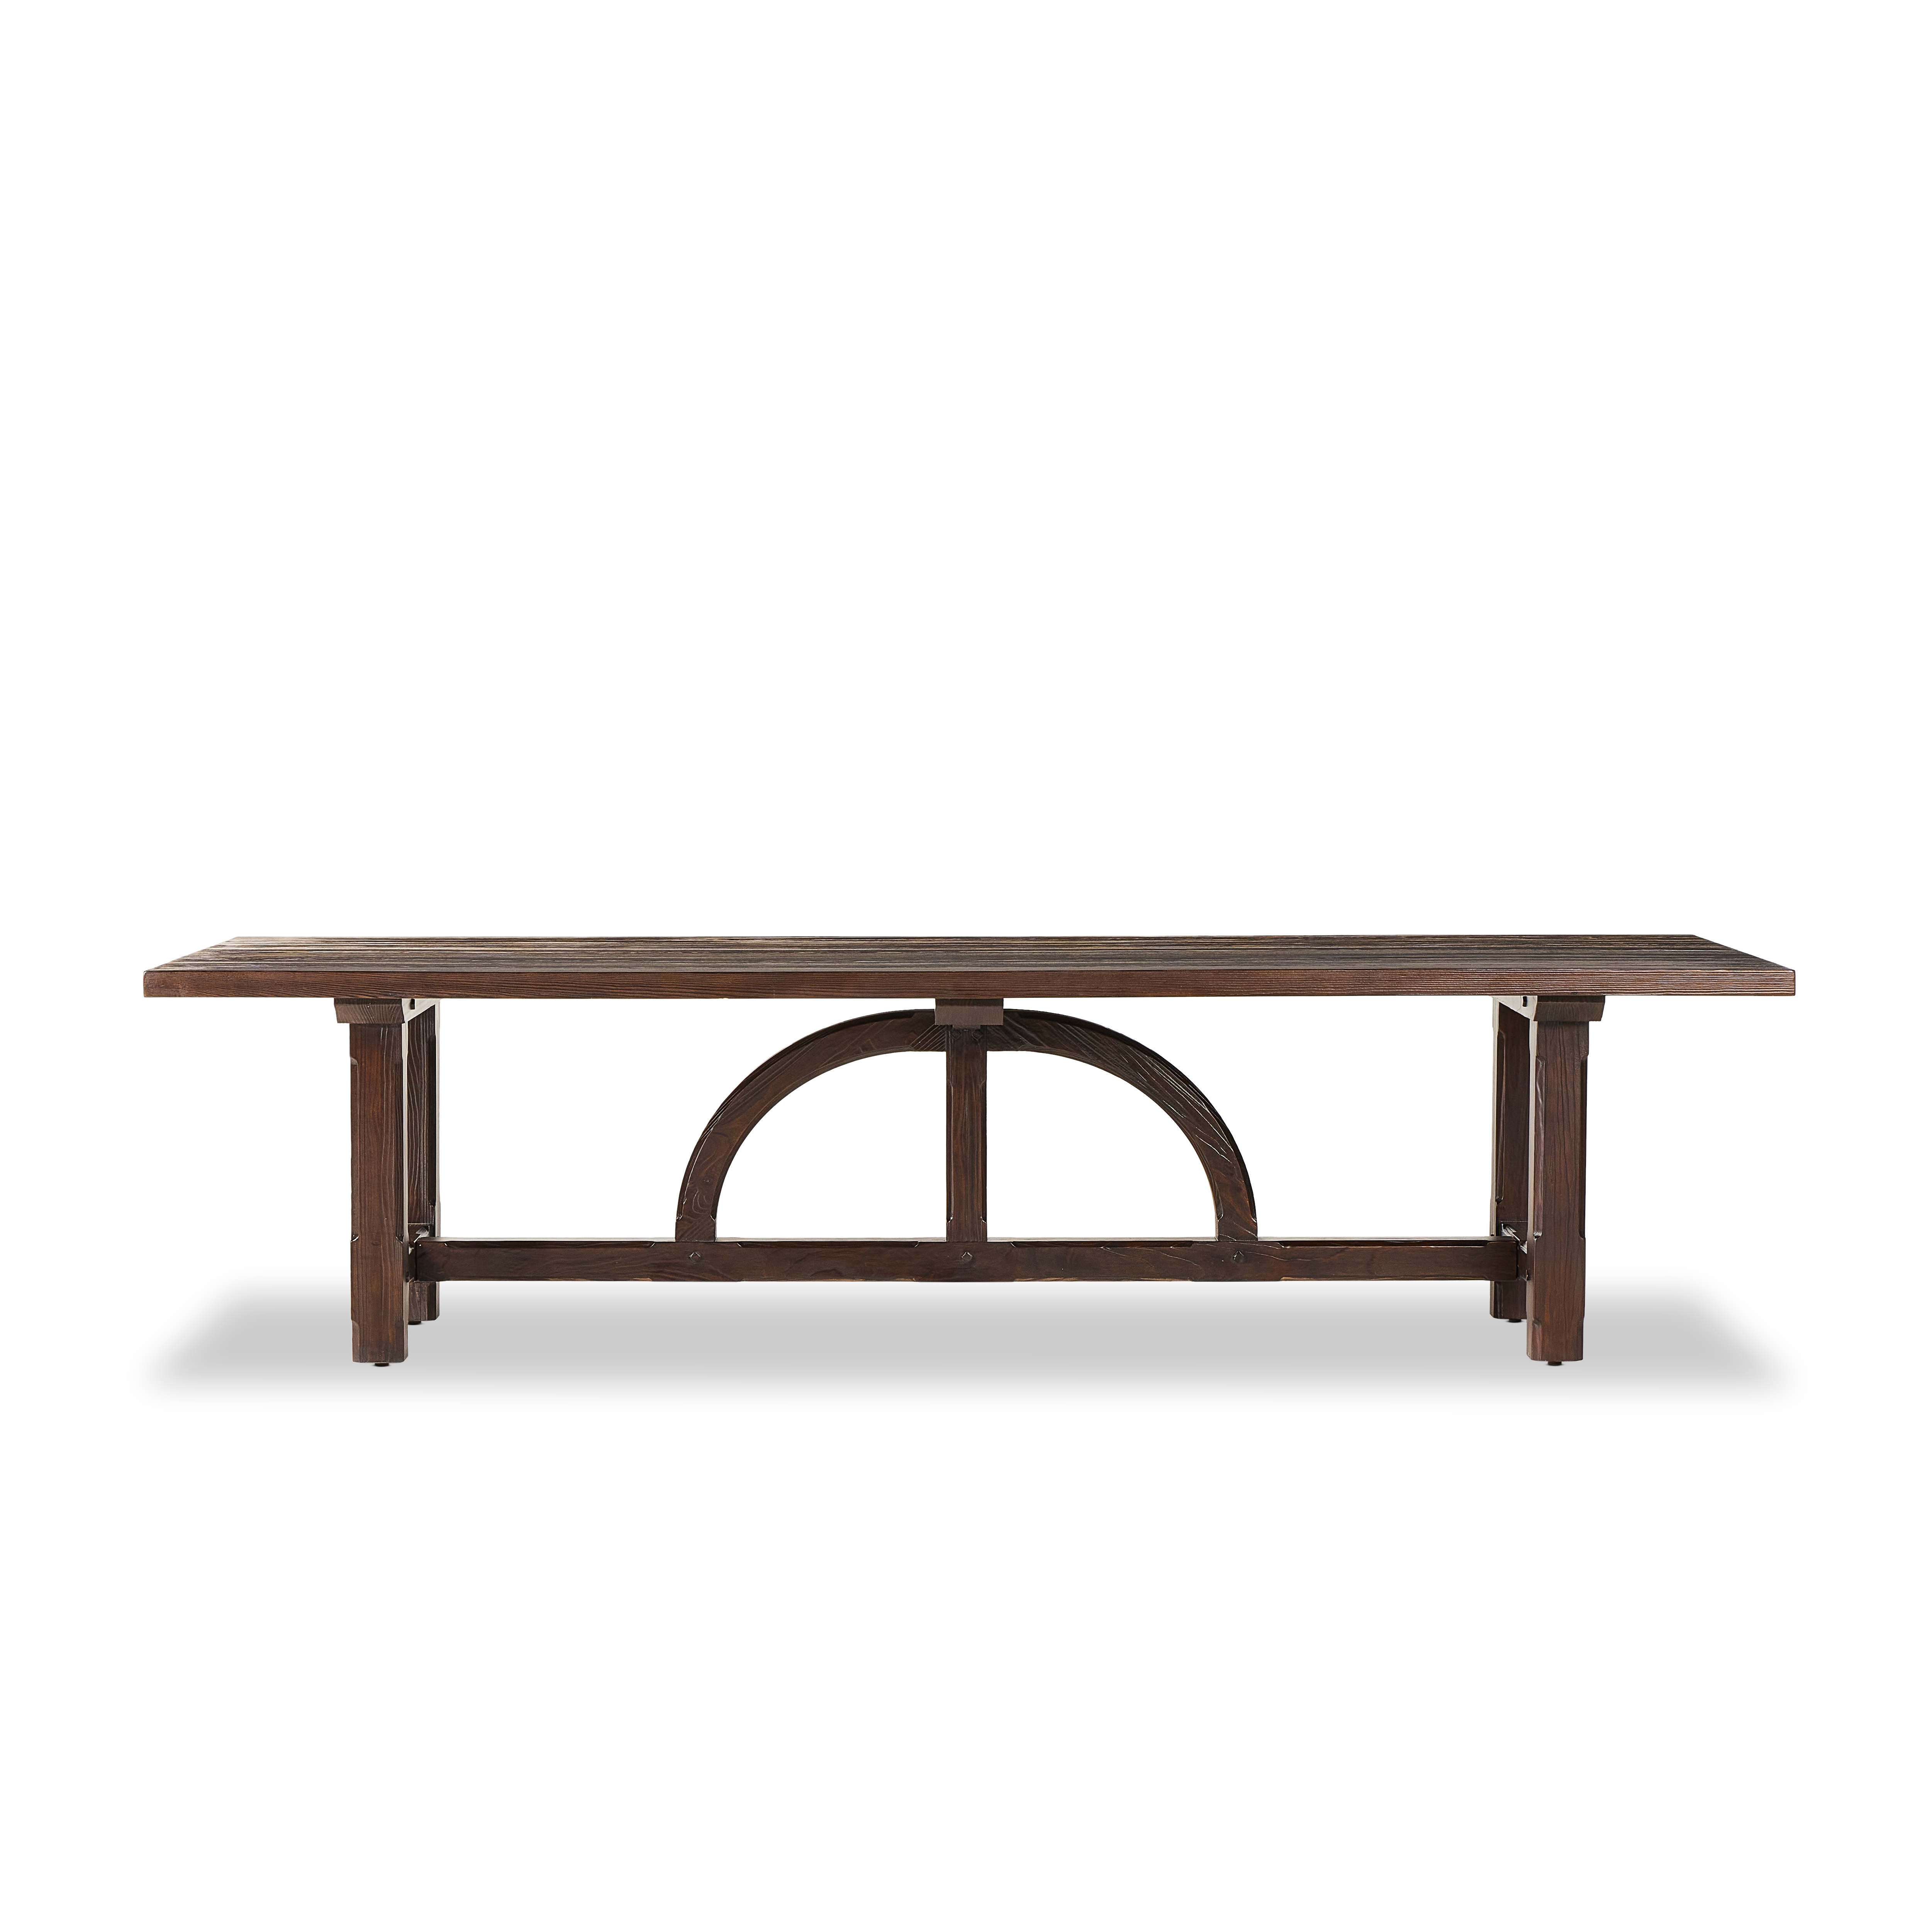 The Arch Dining Table-Medium Brown Fir - Image 4